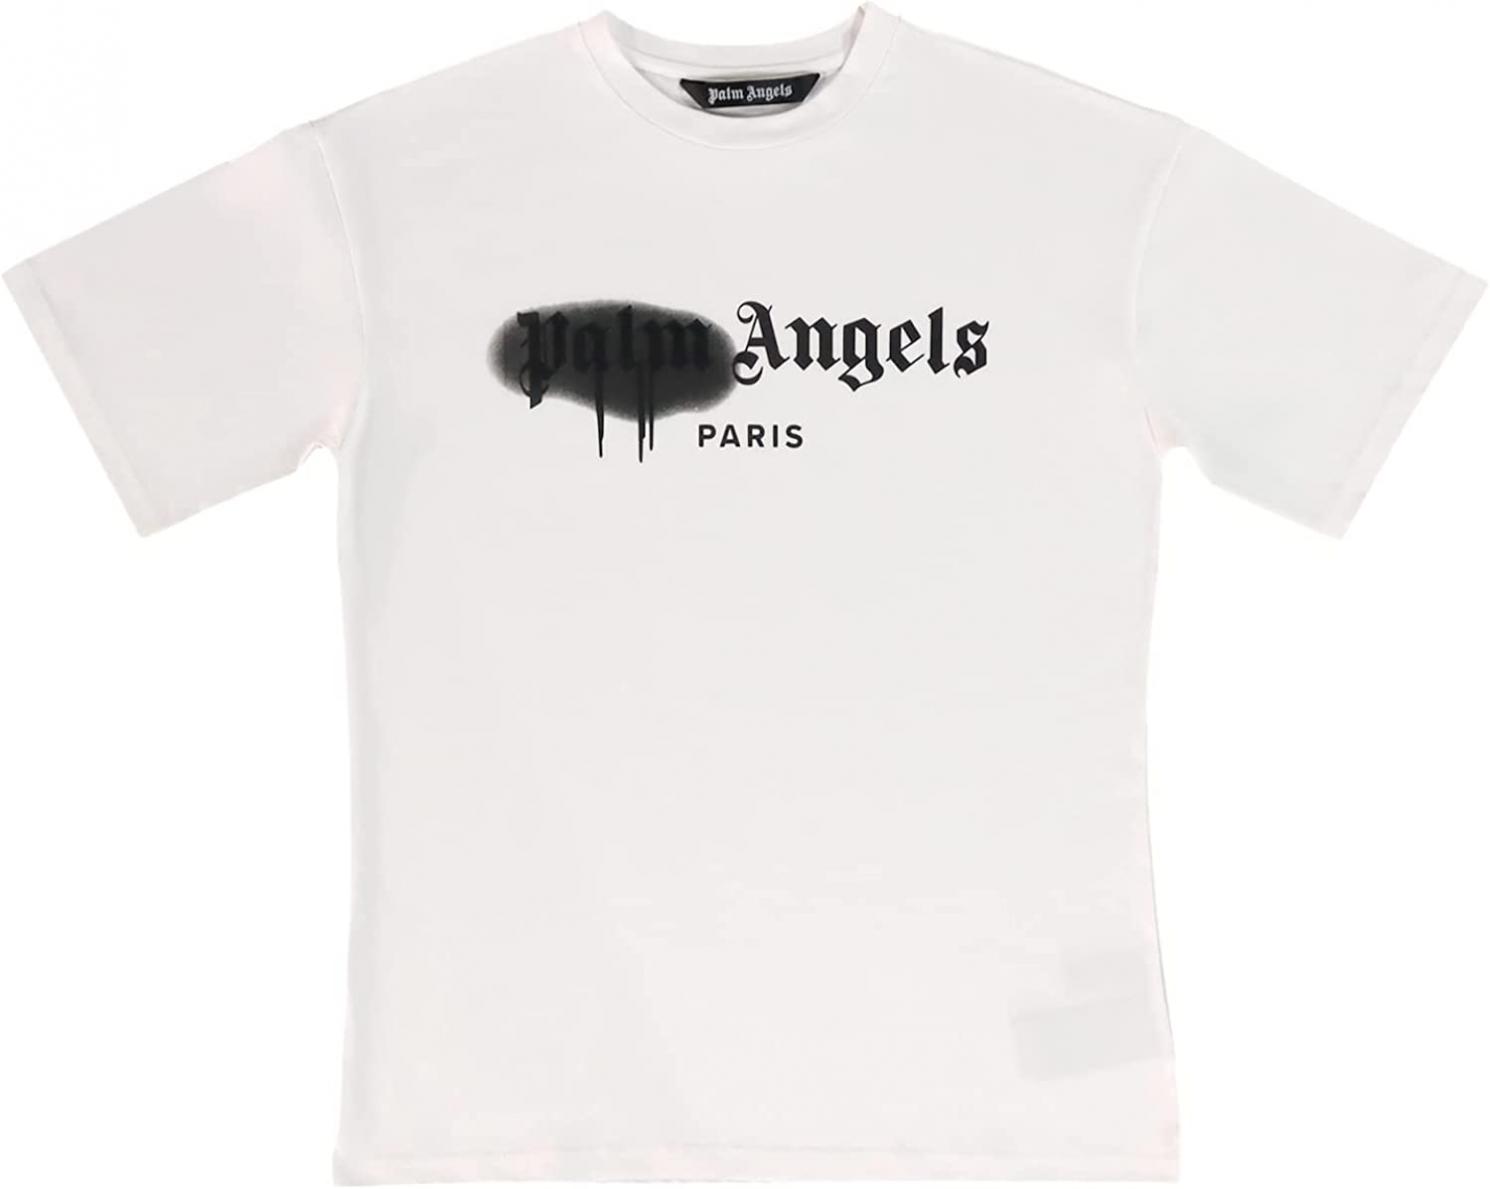 Angles Letter Spray Paint T-Shirt Hip Hop Short Sleeve Tee Summer Cotton Short Sleeve for Men and Women Couples